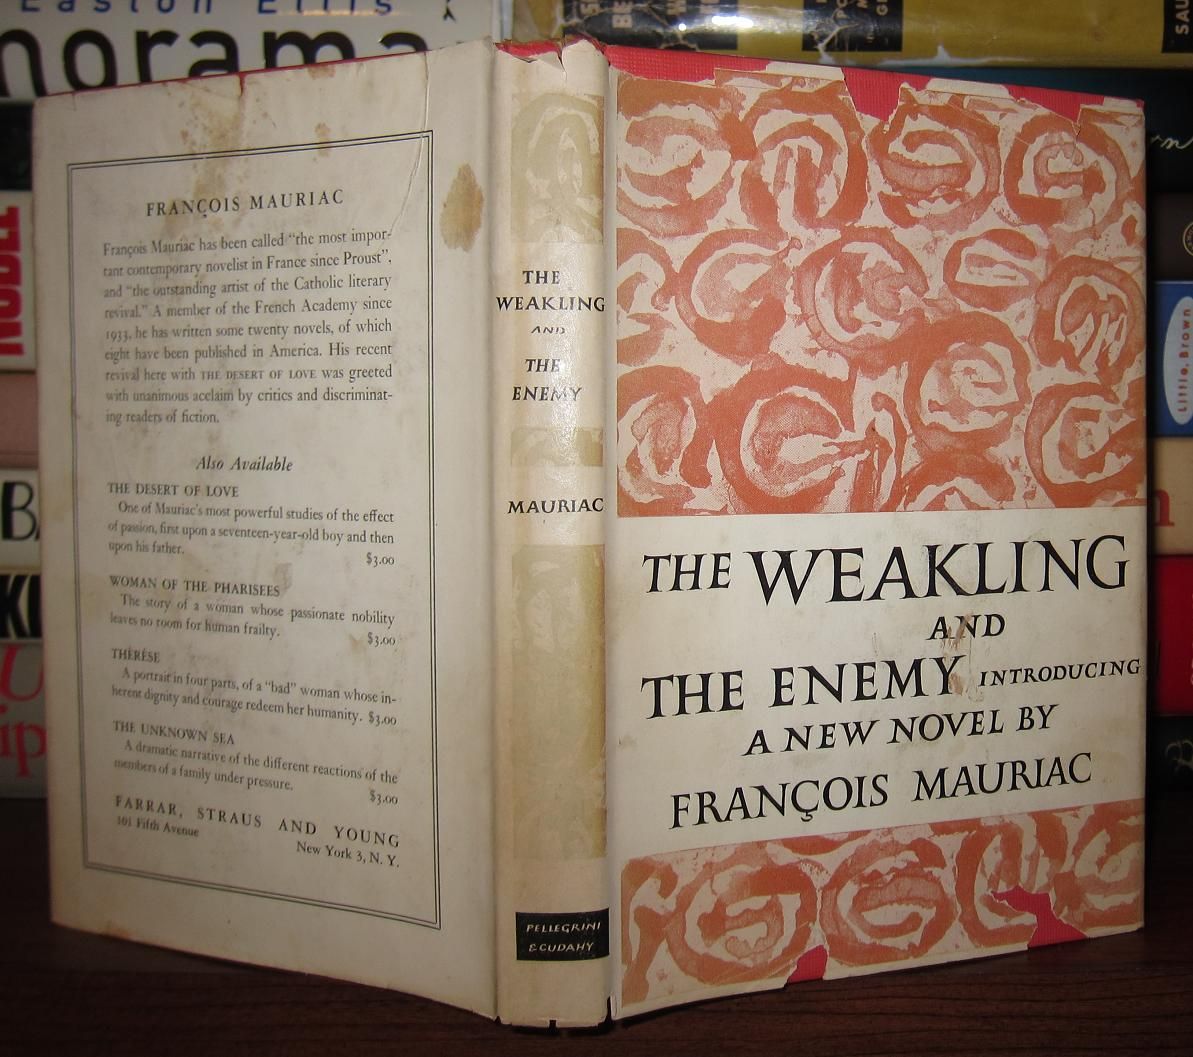 MAURIAC, FRANCOIS, TRANSLATED GERARD HOPKINS - The Weakling and the Enemy